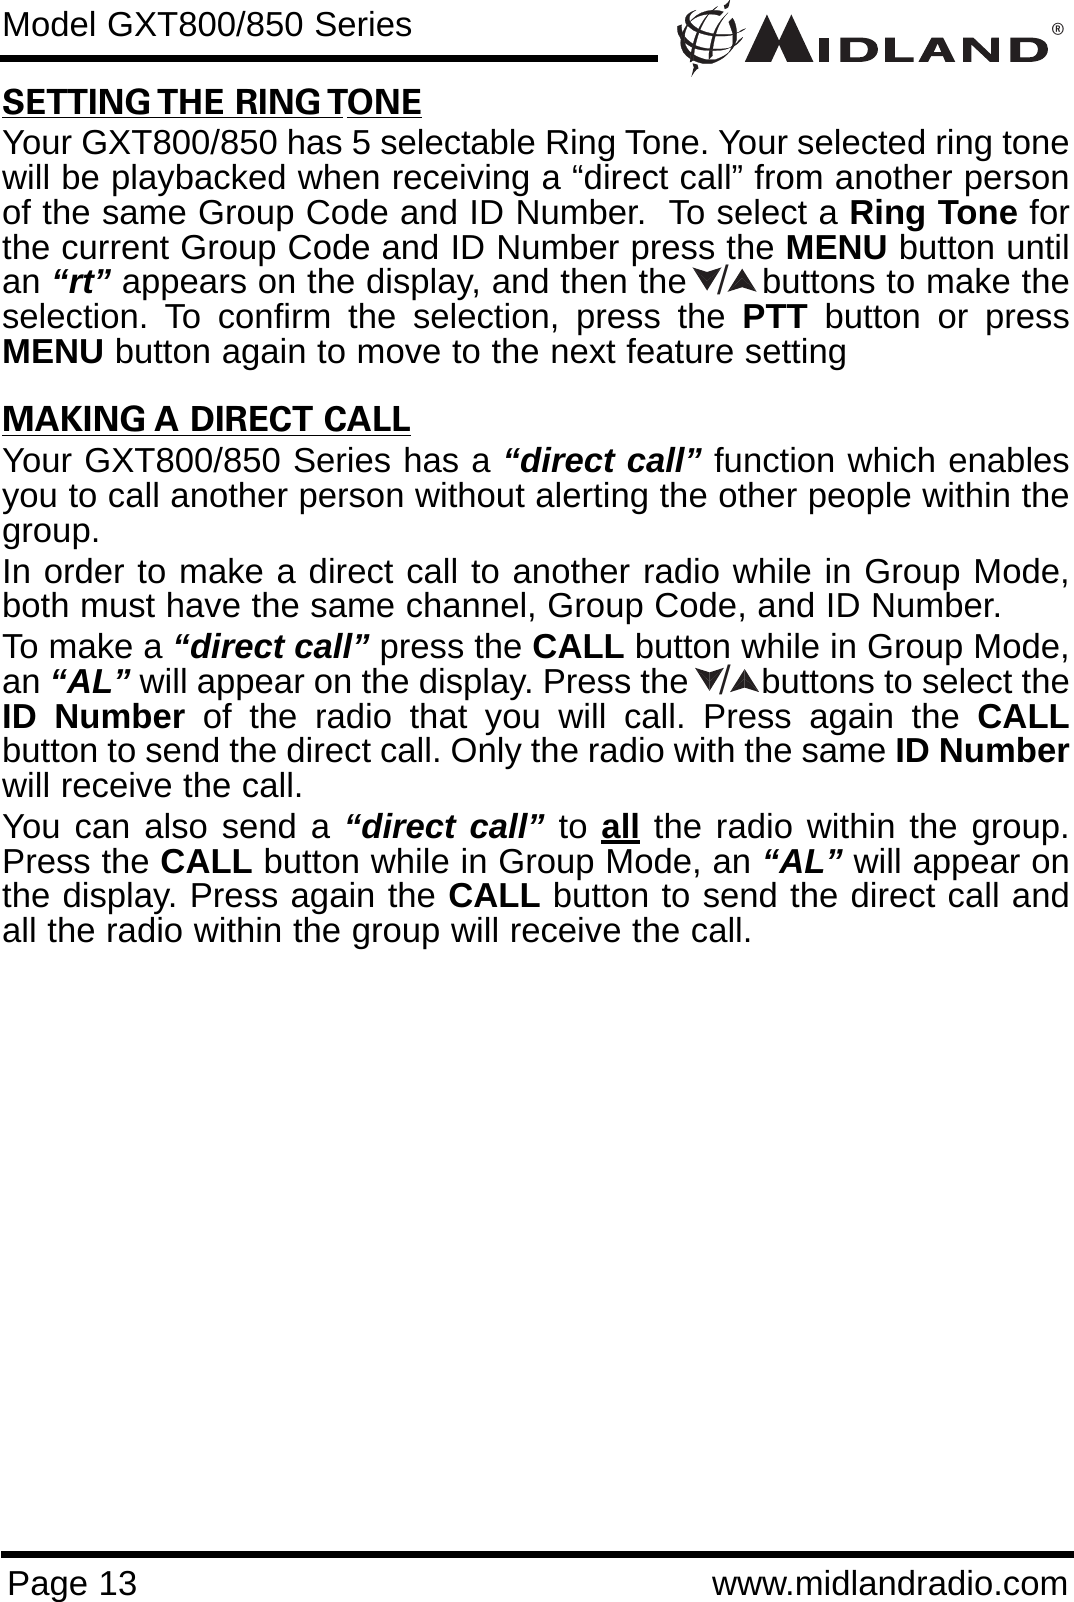 ®Page 13 www.midlandradio.comModel GXT800/850 SeriesSETTING THE RING TONEYour GXT800/850 has 5 selectable Ring Tone. Your selected ring tonewill be playbacked when receiving a “direct call” from another personof the same Group Code and ID Number.  To select a Ring Tone forthe current Group Code and ID Number press the MENU button untilan “rt” appears on the display, and then the       buttons to make theselection. To confirm the selection, press the PTT button or pressMENU button again to move to the next feature settingMAKING A DIRECT CALLYour GXT800/850 Series has a “direct call” function which enablesyou to call another person without alerting the other people within thegroup.In order to make a direct call to another radio while in Group Mode,both must have the same channel, Group Code, and ID Number.To make a “direct call” press the CALL button while in Group Mode,an “AL” will appear on the display. Press the        buttons to select theID Number of the radio that you will call. Press again the CALLbutton to send the direct call. Only the radio with the same ID Numberwill receive the call.You can also send a “direct call” to all the radio within the group.Press the CALL button while in Group Mode, an “AL” will appear onthe display. Press again the CALL button to send the direct call andall the radio within the group will receive the call.//